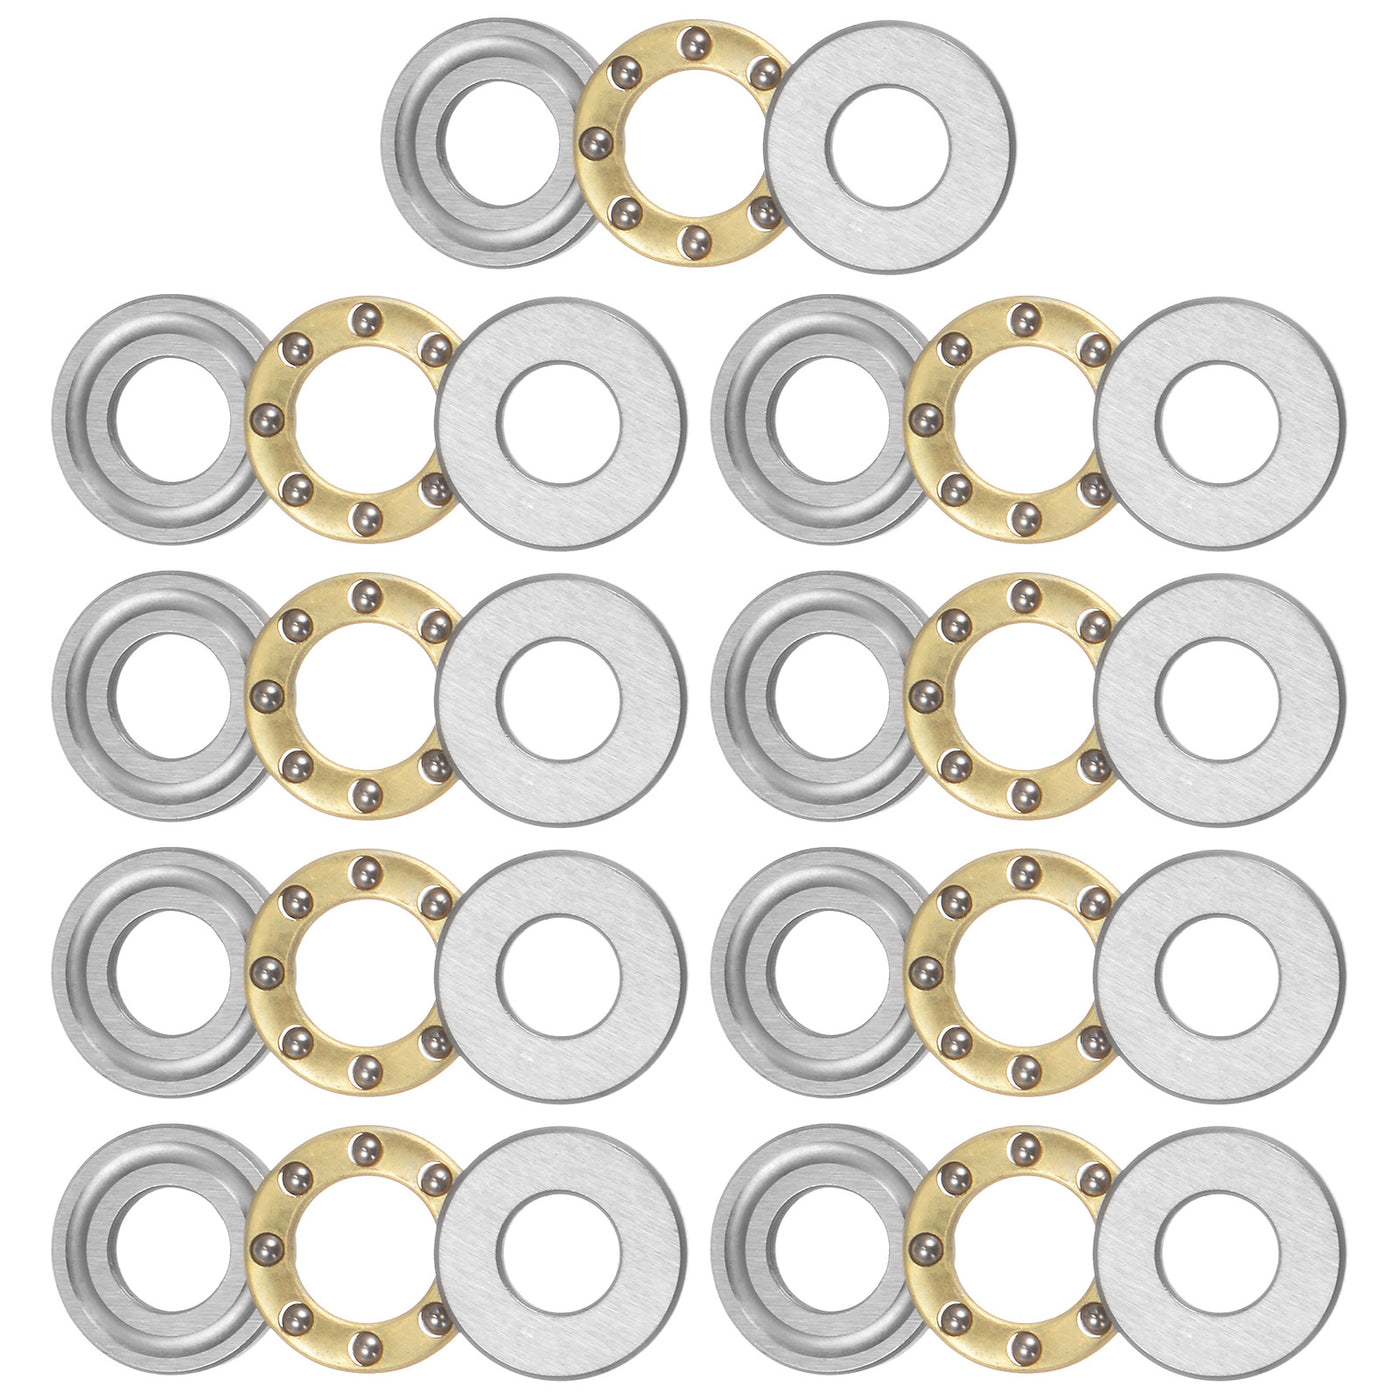 uxcell Uxcell F5-11M Thrust Ball Bearing 5x11x4.5mm Brass with Washers 9pcs